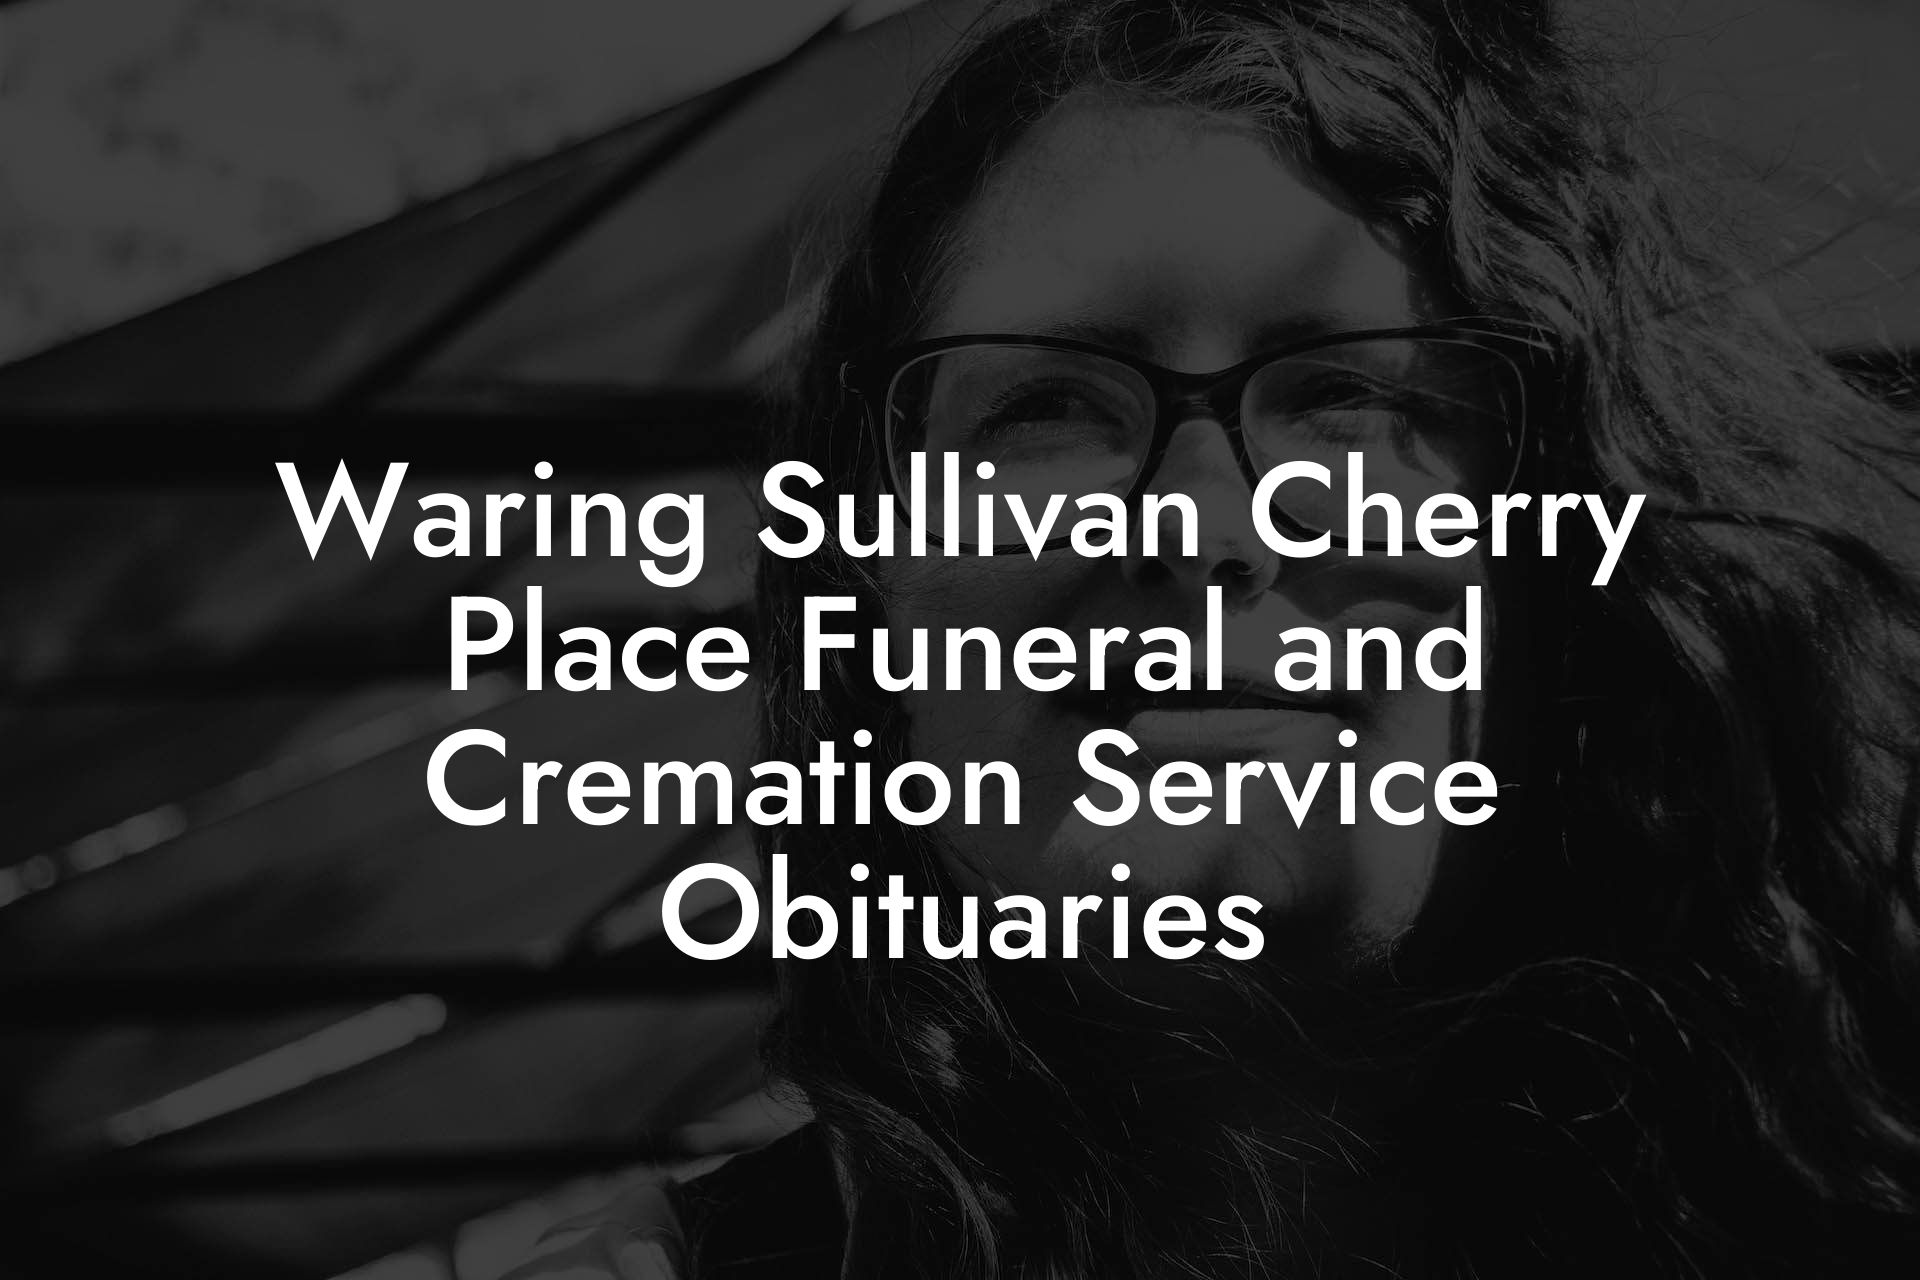 Waring Sullivan Cherry Place Funeral and Cremation Service Obituaries